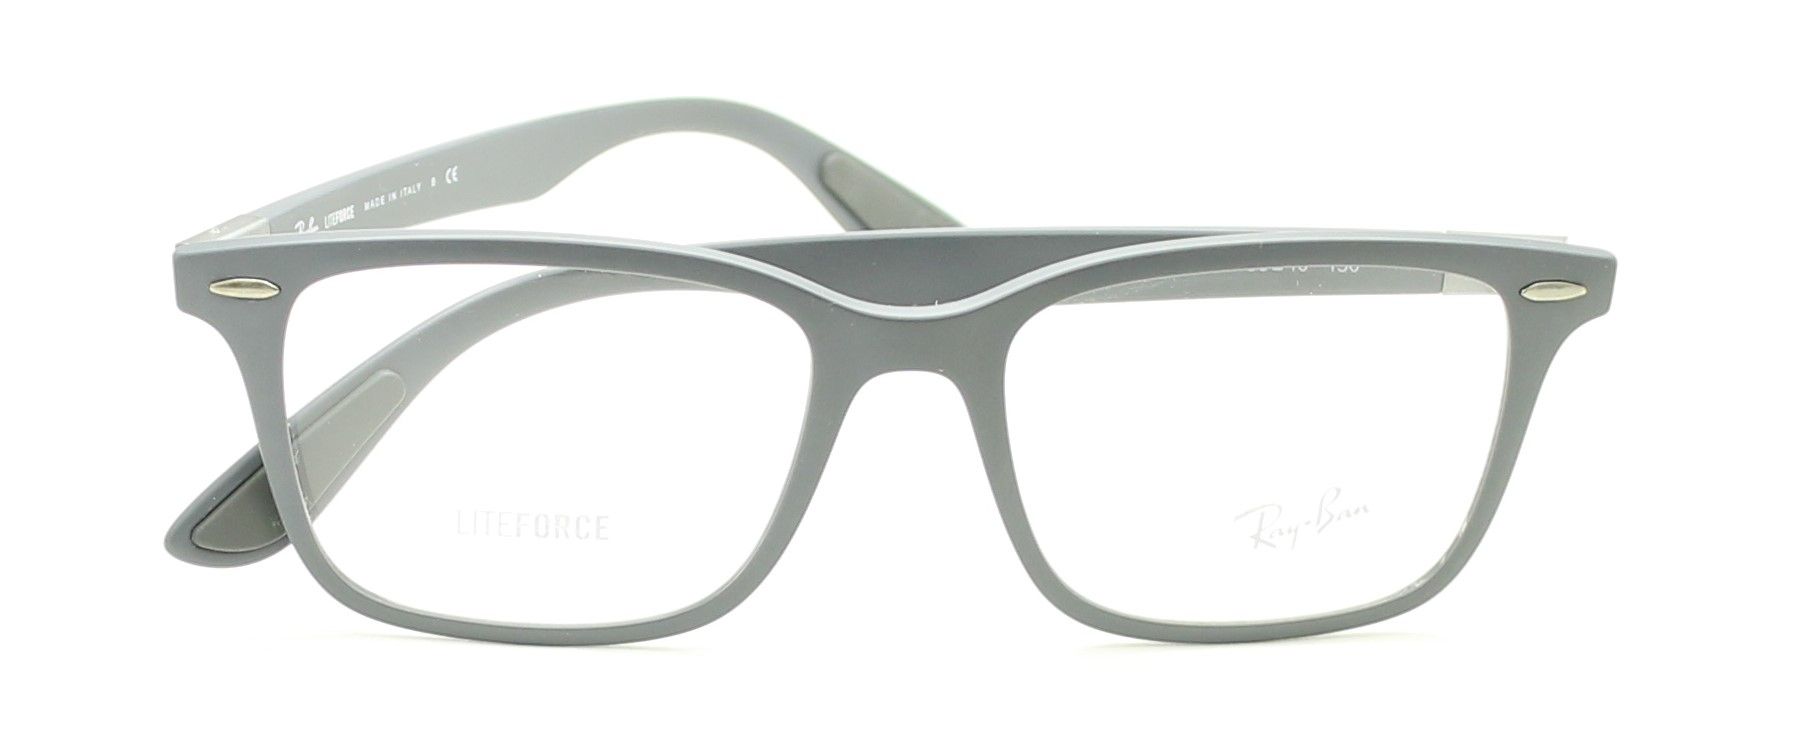 ray ban liteforce rb 7144